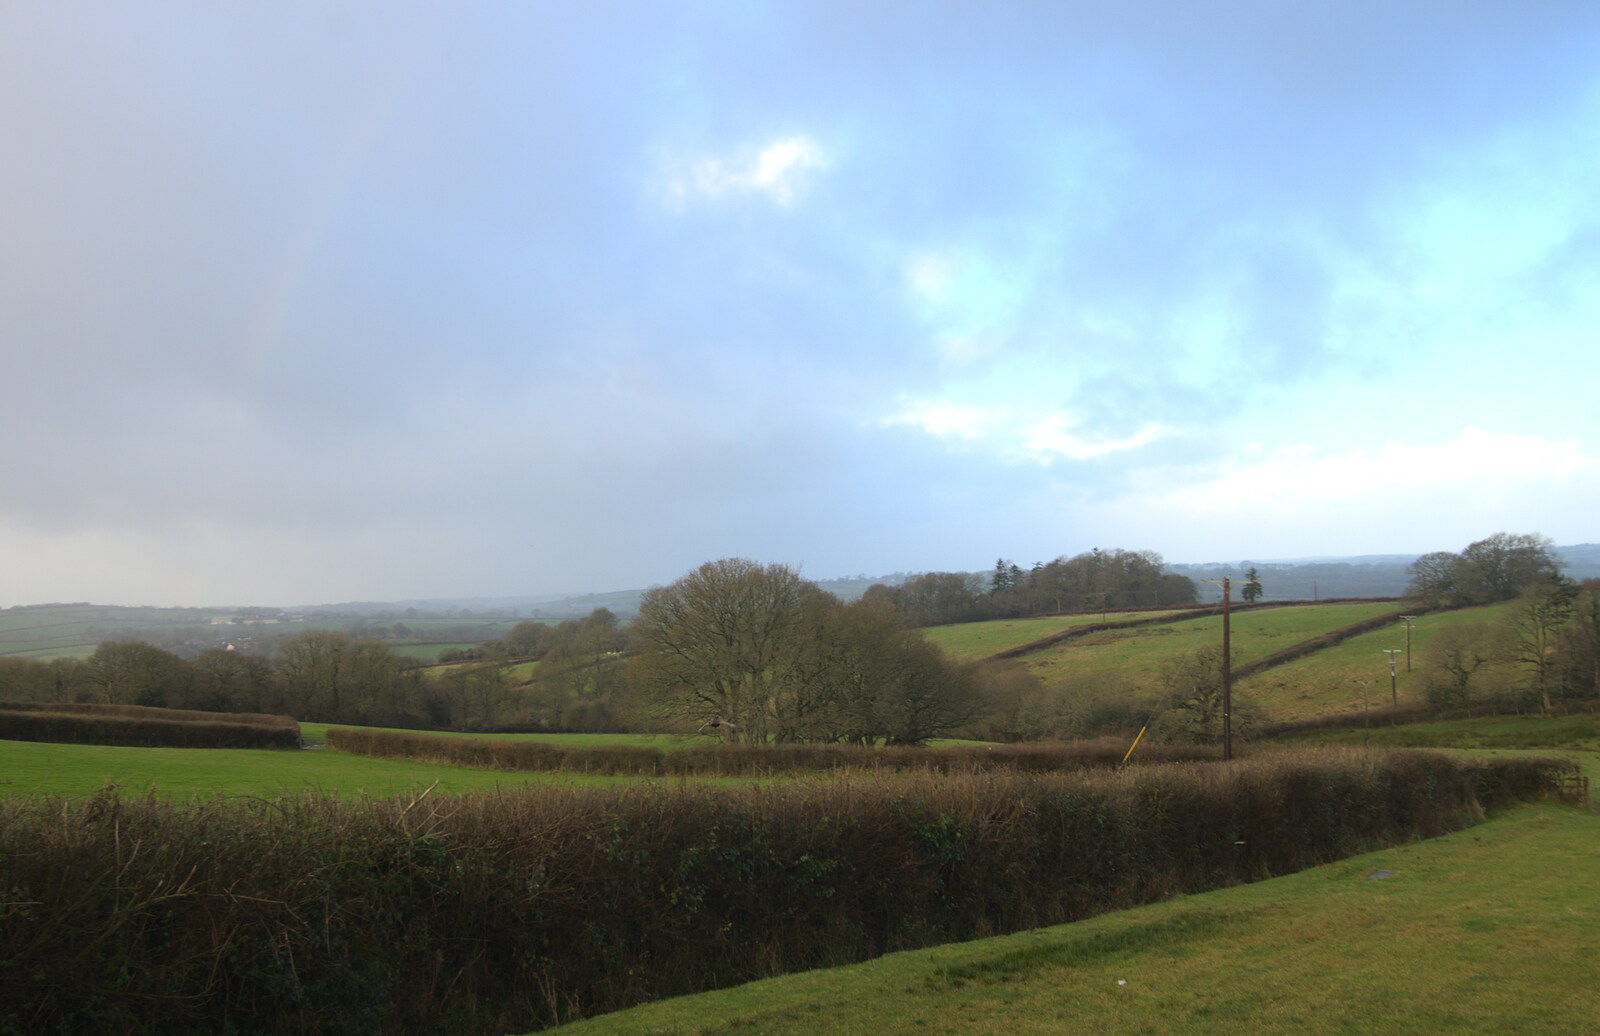 There's an ever-so-faint rainbow from The Boxing Day Hunt, Chagford, Devon - 26th December 2012